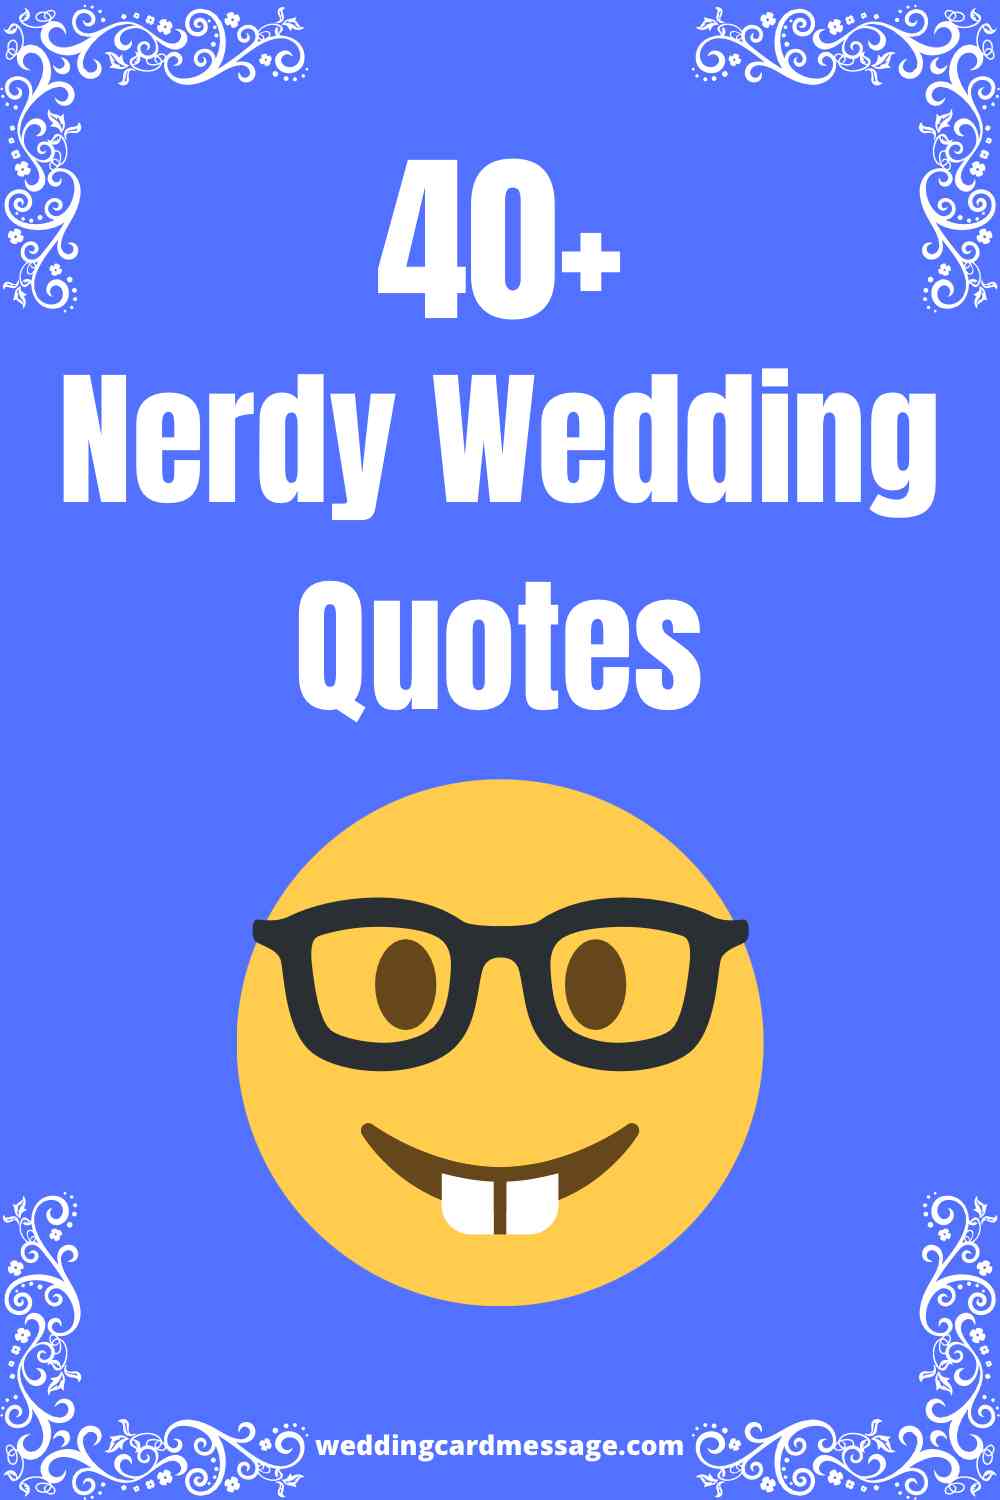 40+ Nerdy Wedding Quotes for Geeks